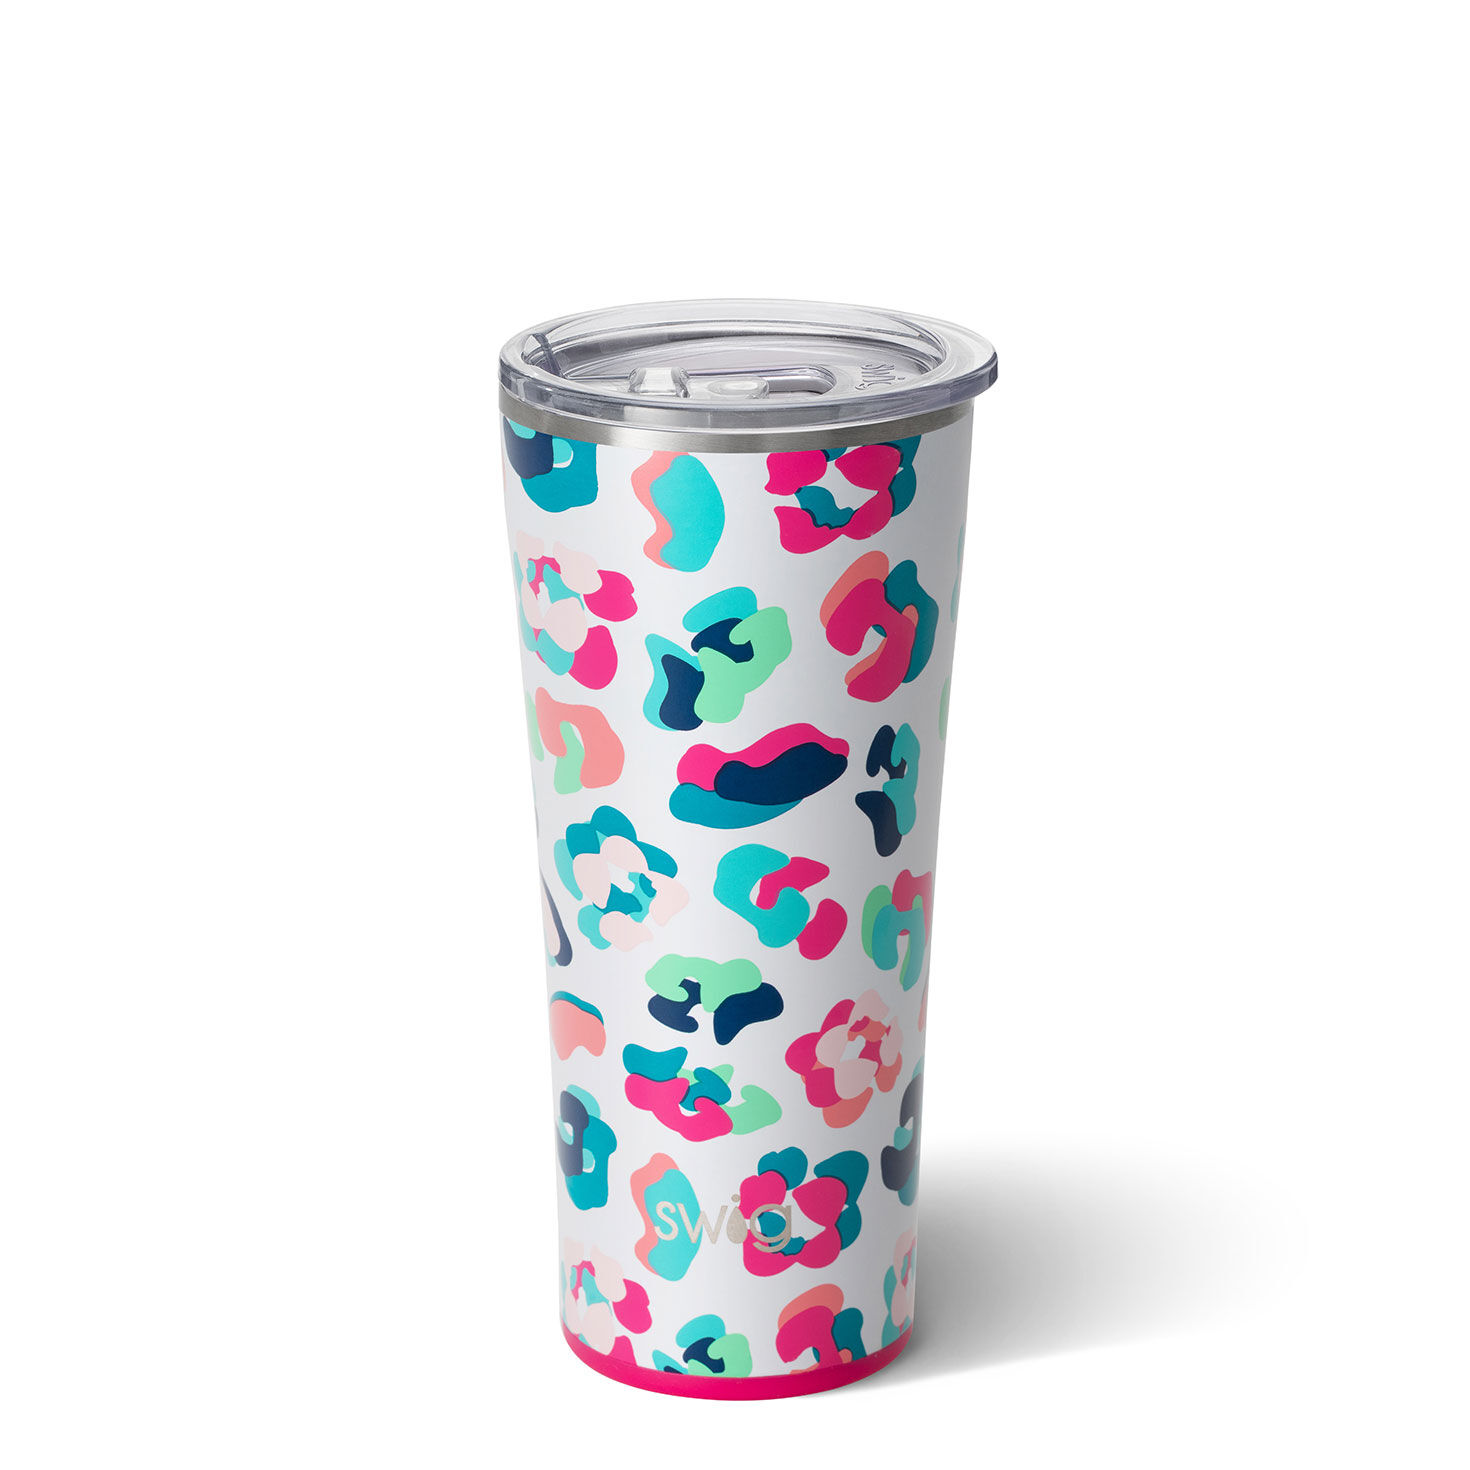 https://www.hallmark.com/dw/image/v2/AALB_PRD/on/demandware.static/-/Sites-hallmark-master/default/dw62604fd6/images/finished-goods/products/S102C22PA/BluePink-Leopard-Print-Insulated-Cup-With-Lid_S102C22PA_01.jpg?sfrm=jpg